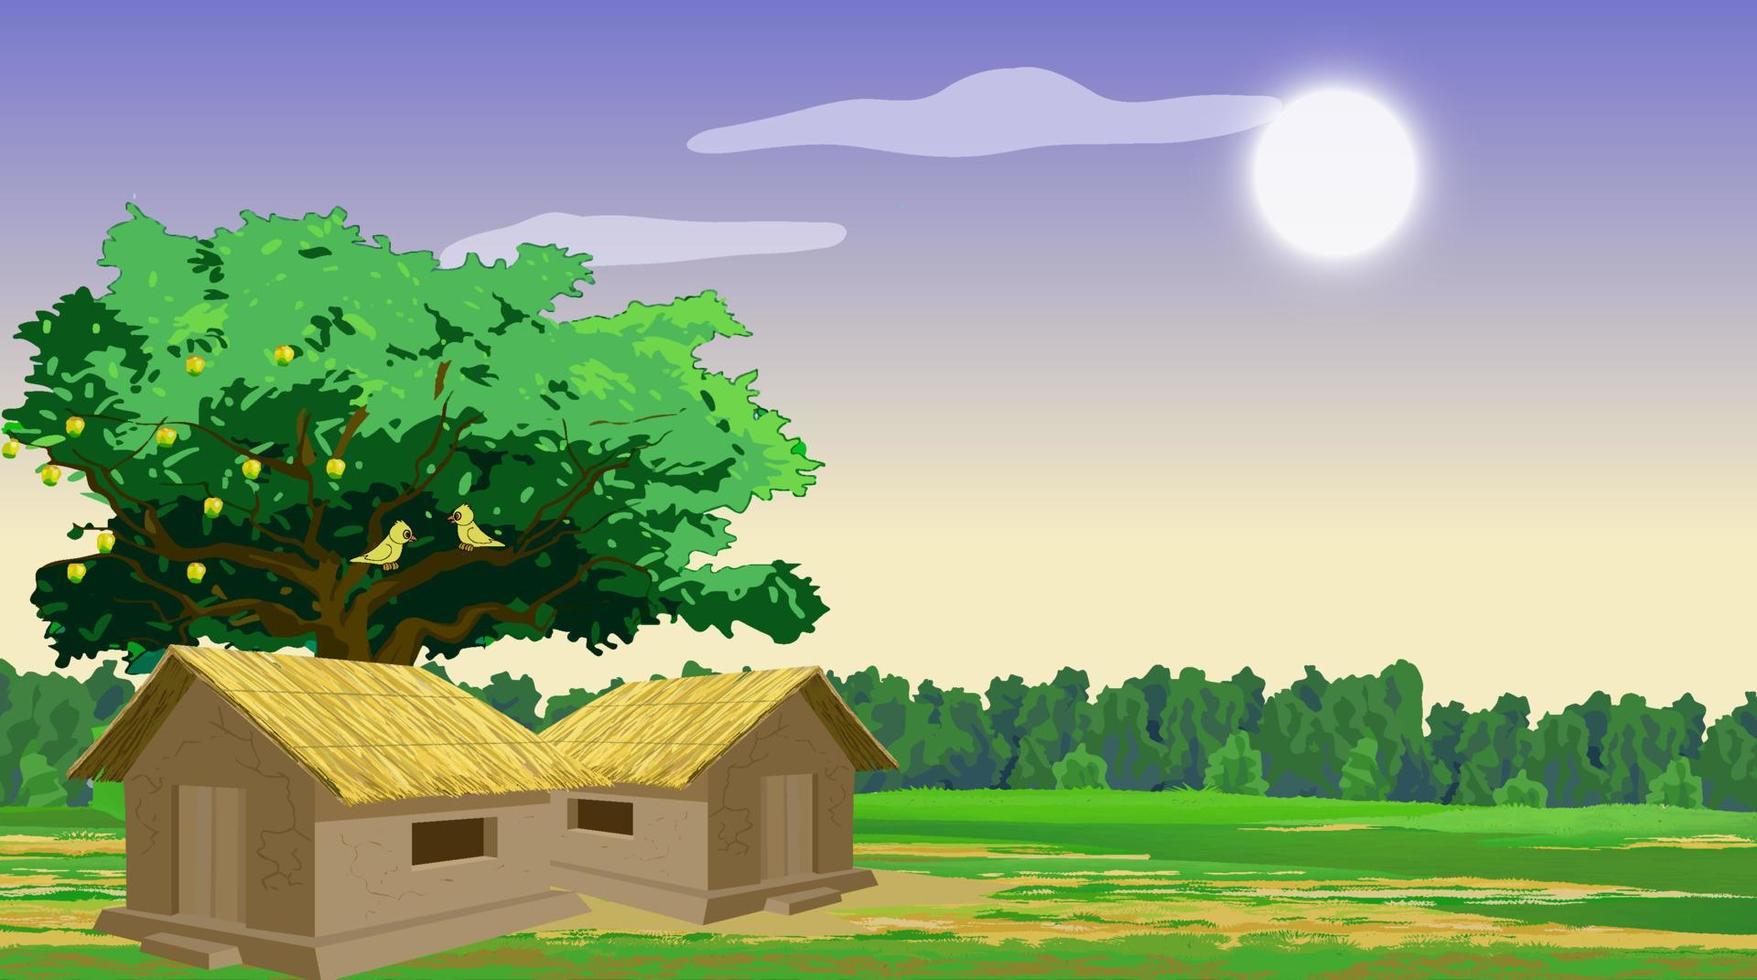 Village nature scene with hut and green field. vector